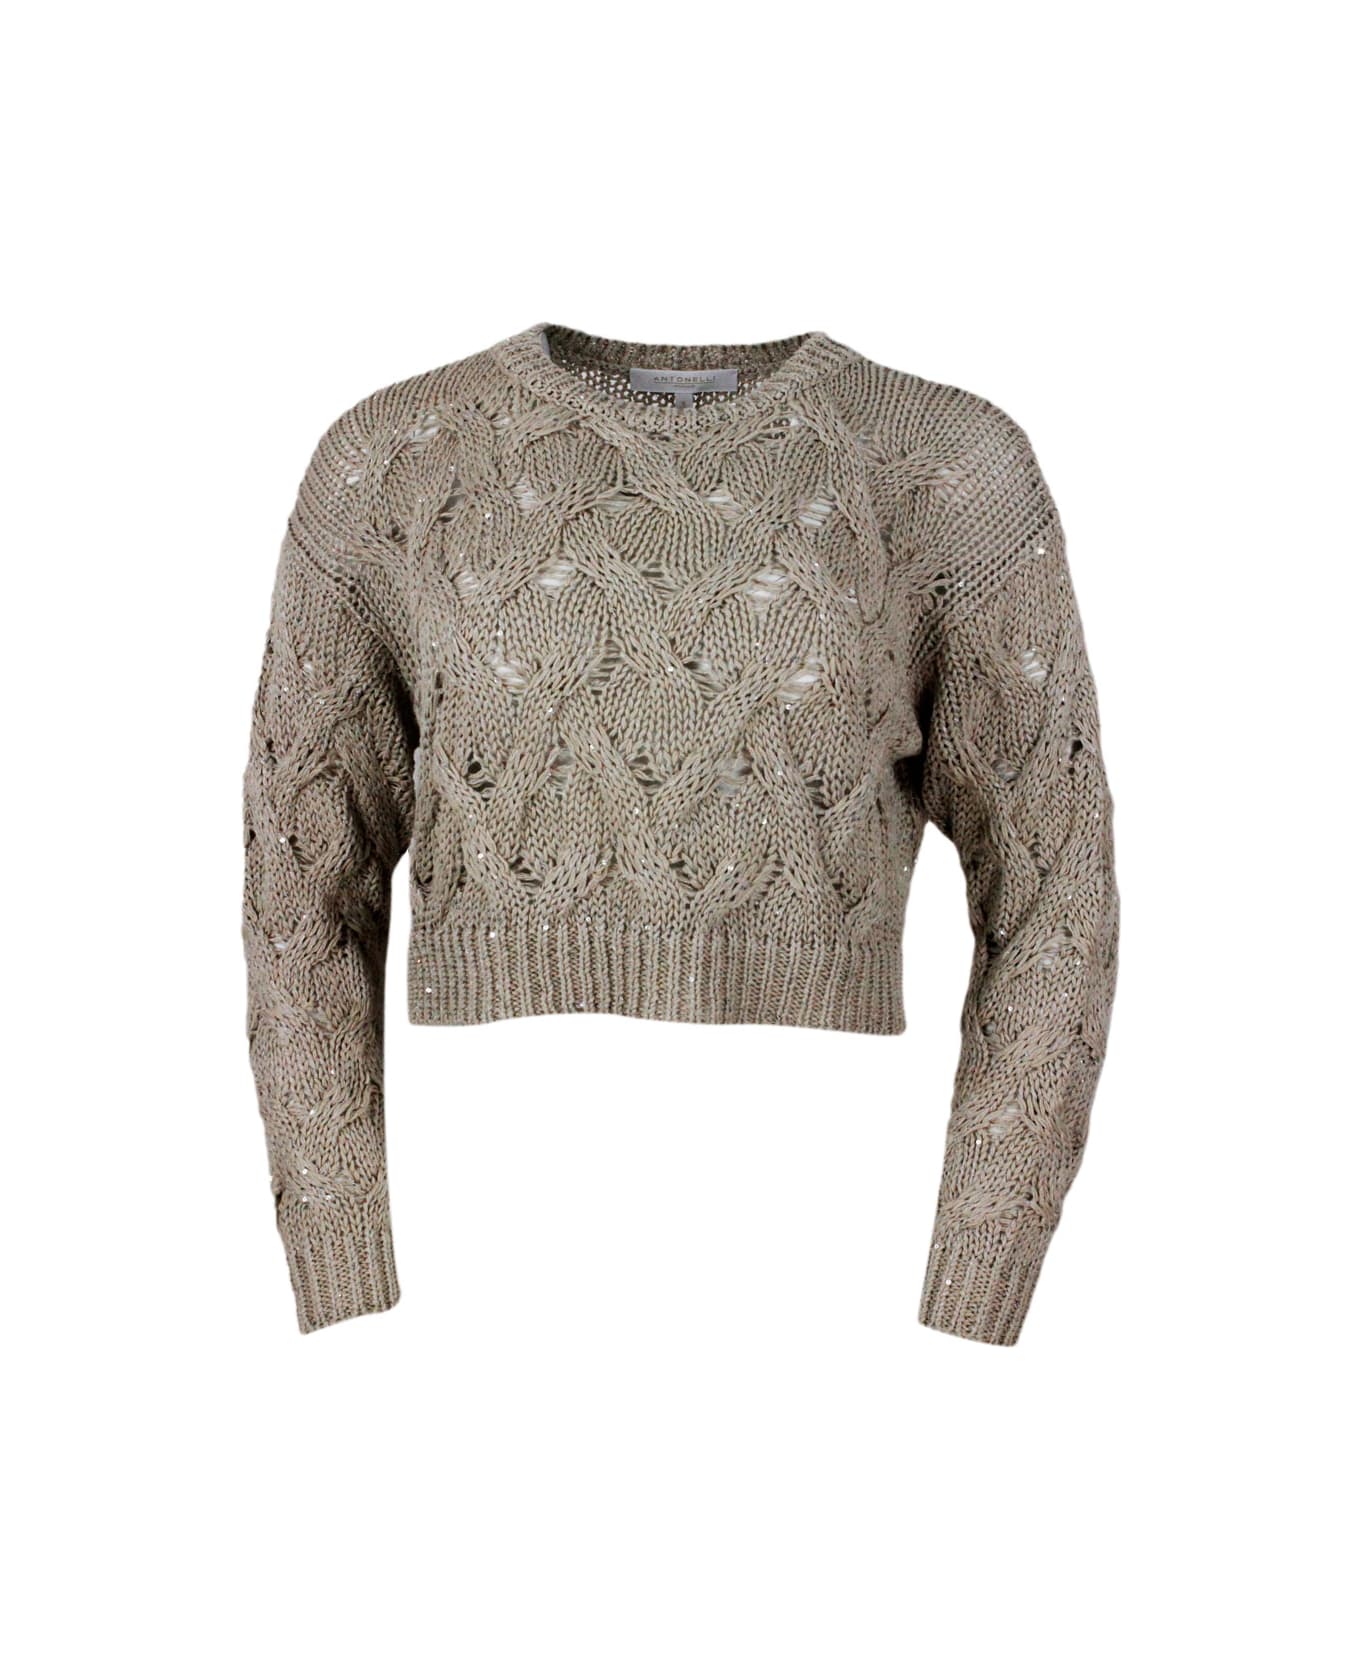 Antonelli Long-sleeved Crew-neck Sweater With Braided Workmanship Embellished With Microsequins - Beige